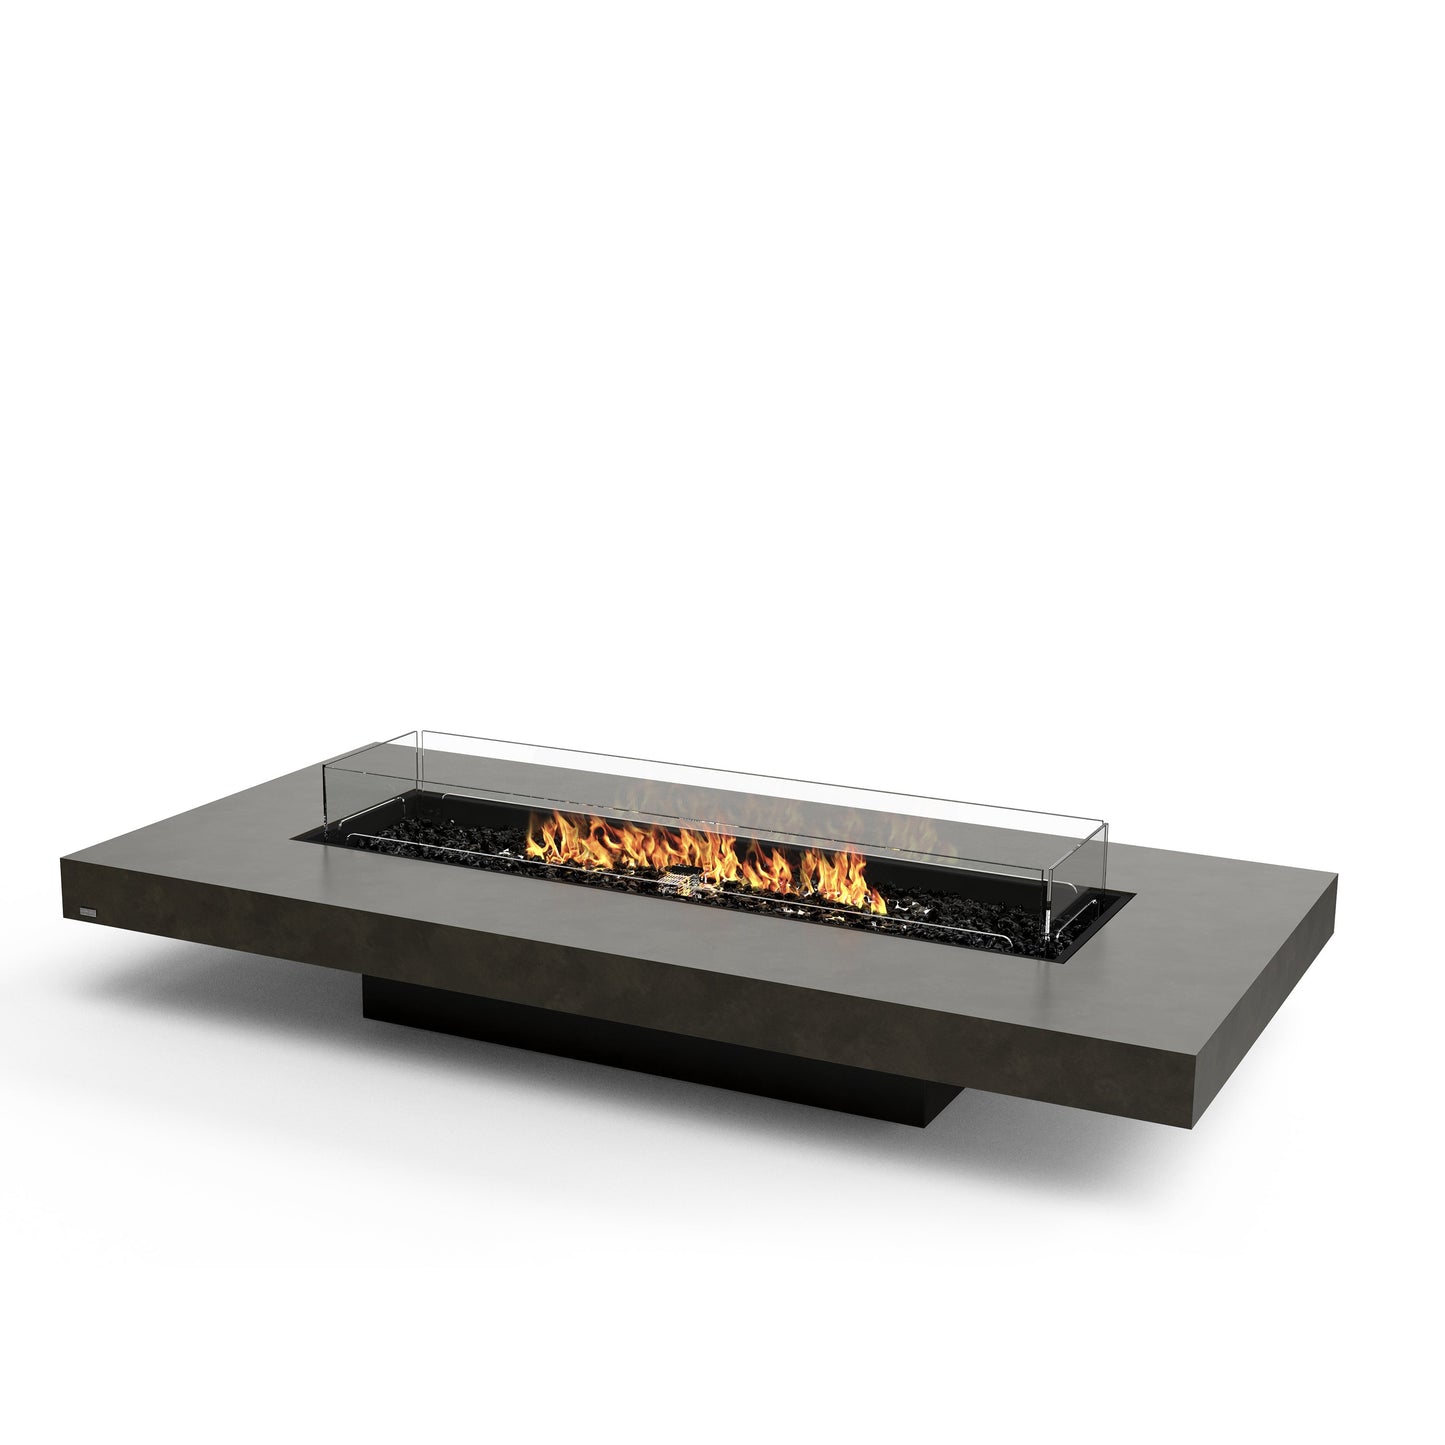 EcoSmart Fire 89" Gin 90 Low Height Fire Pit Table with Gas LP/NG Burner by Mad Design Group